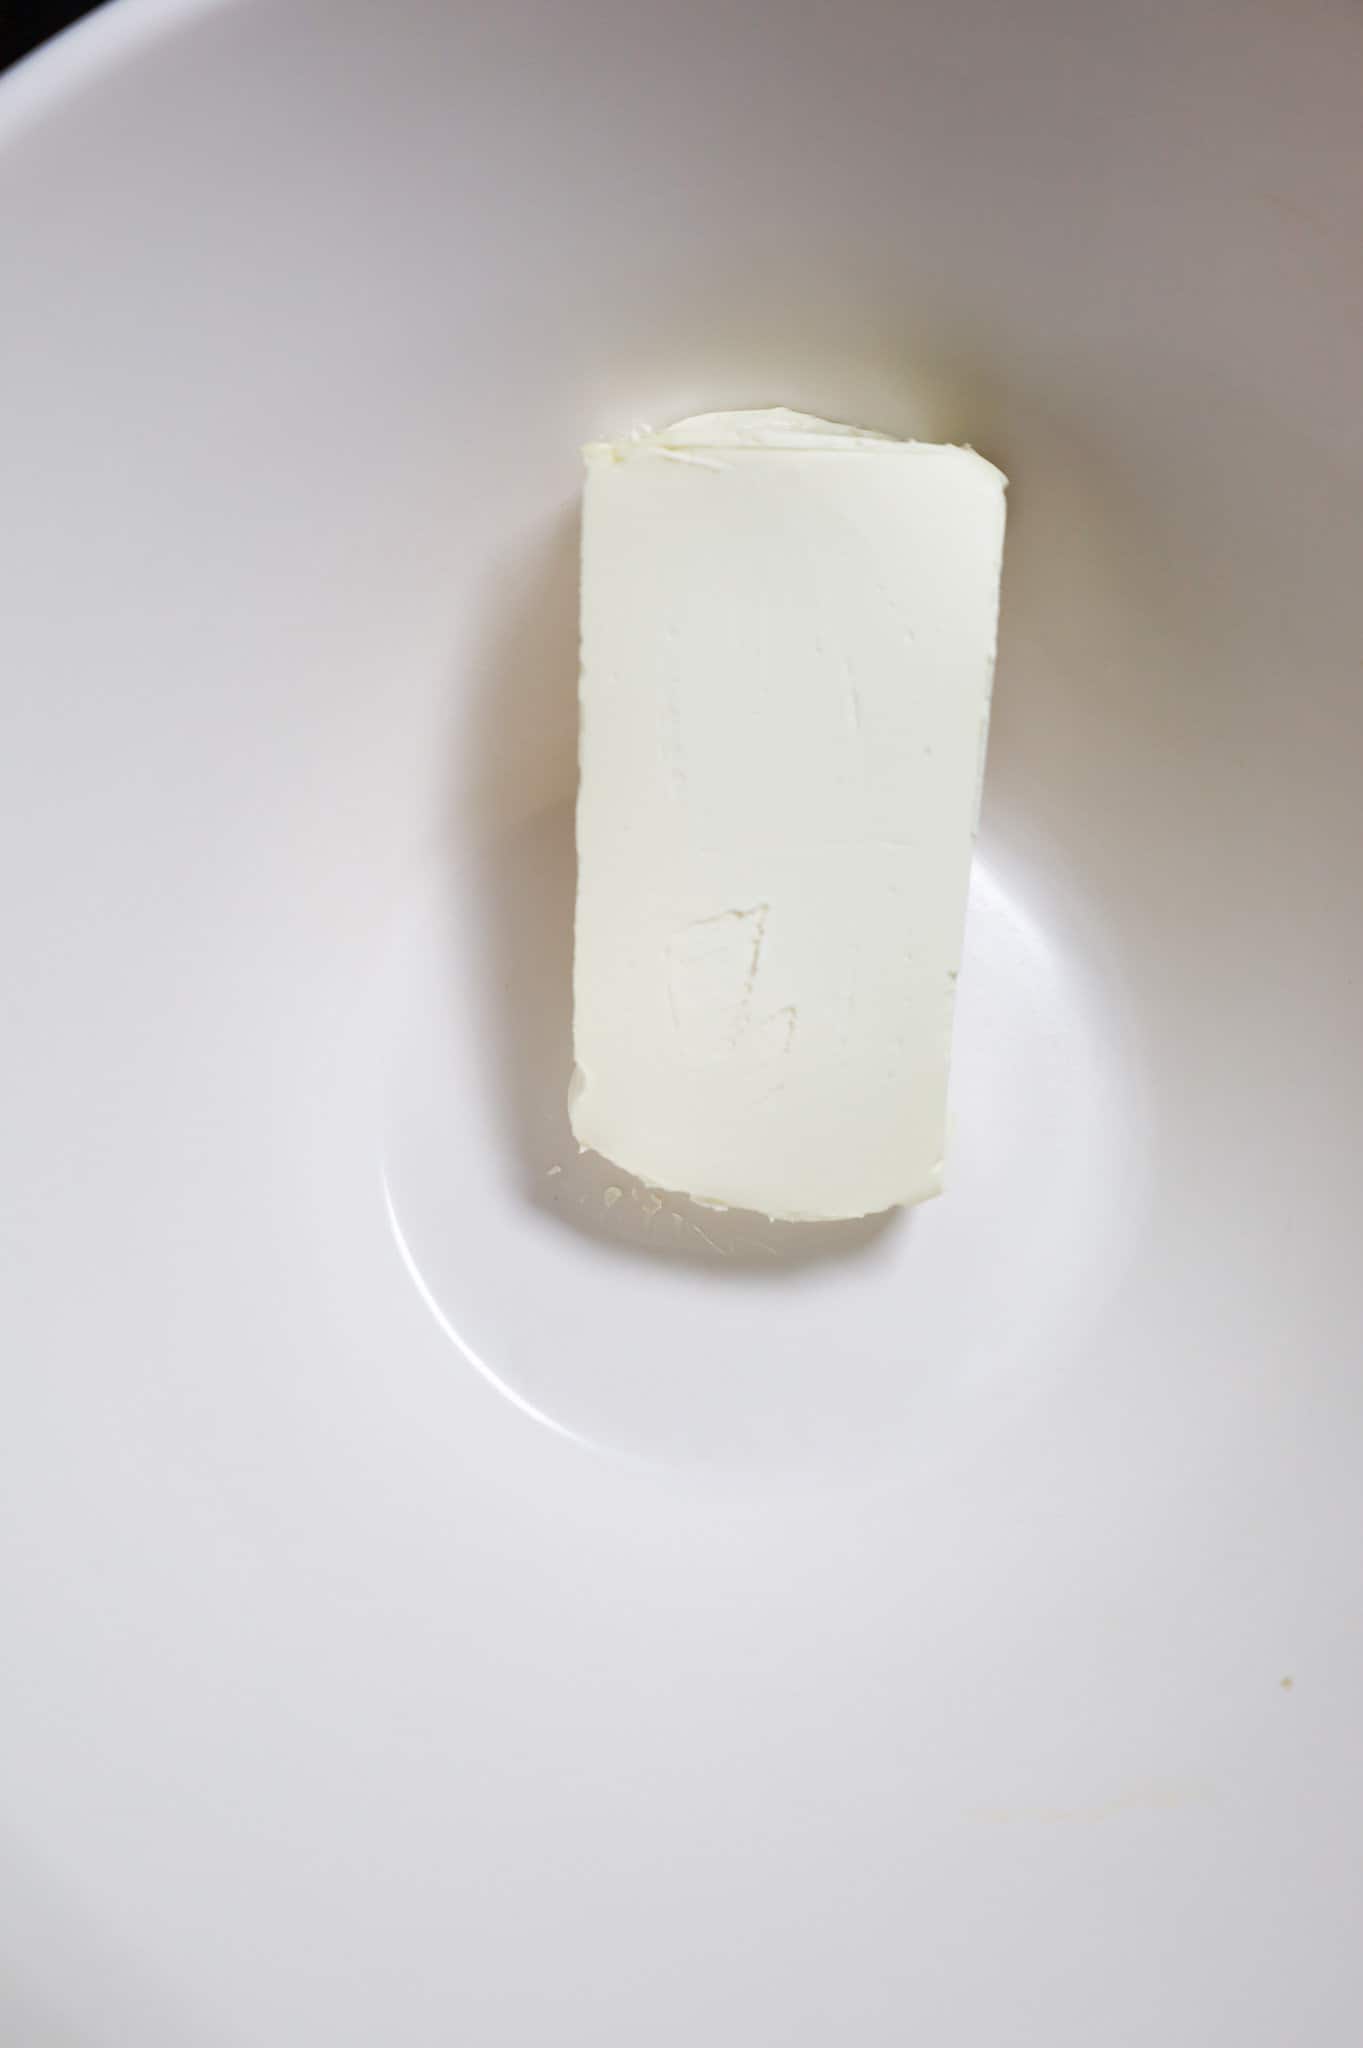 cream cheese brick in a mixing bowl